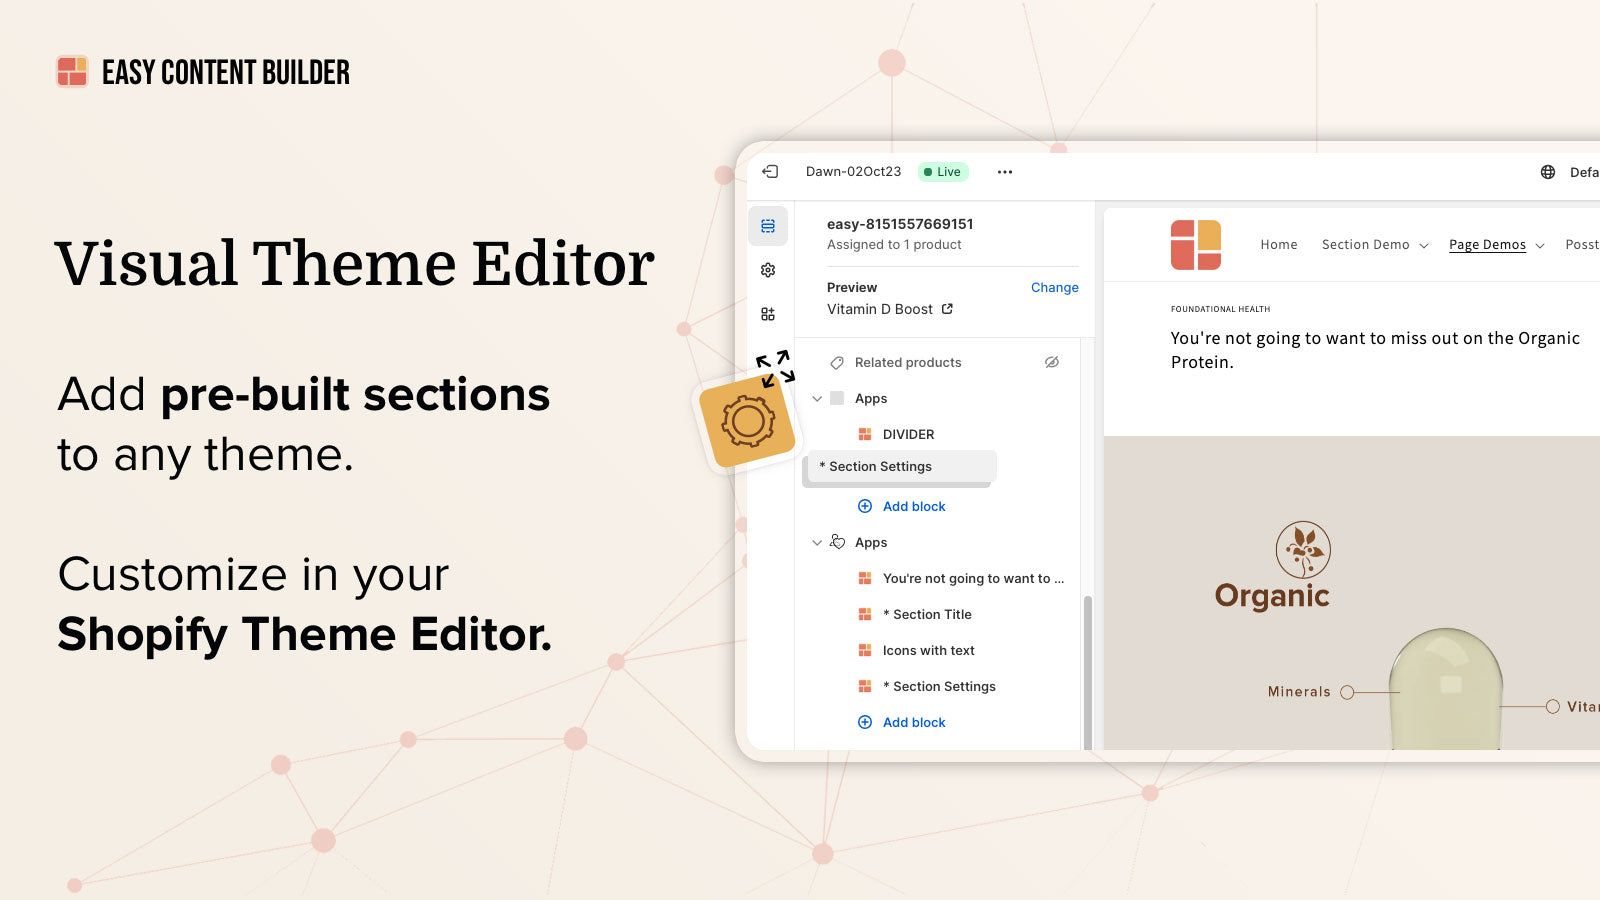 Add sections to any theme, customize in Shopify Theme Editor.